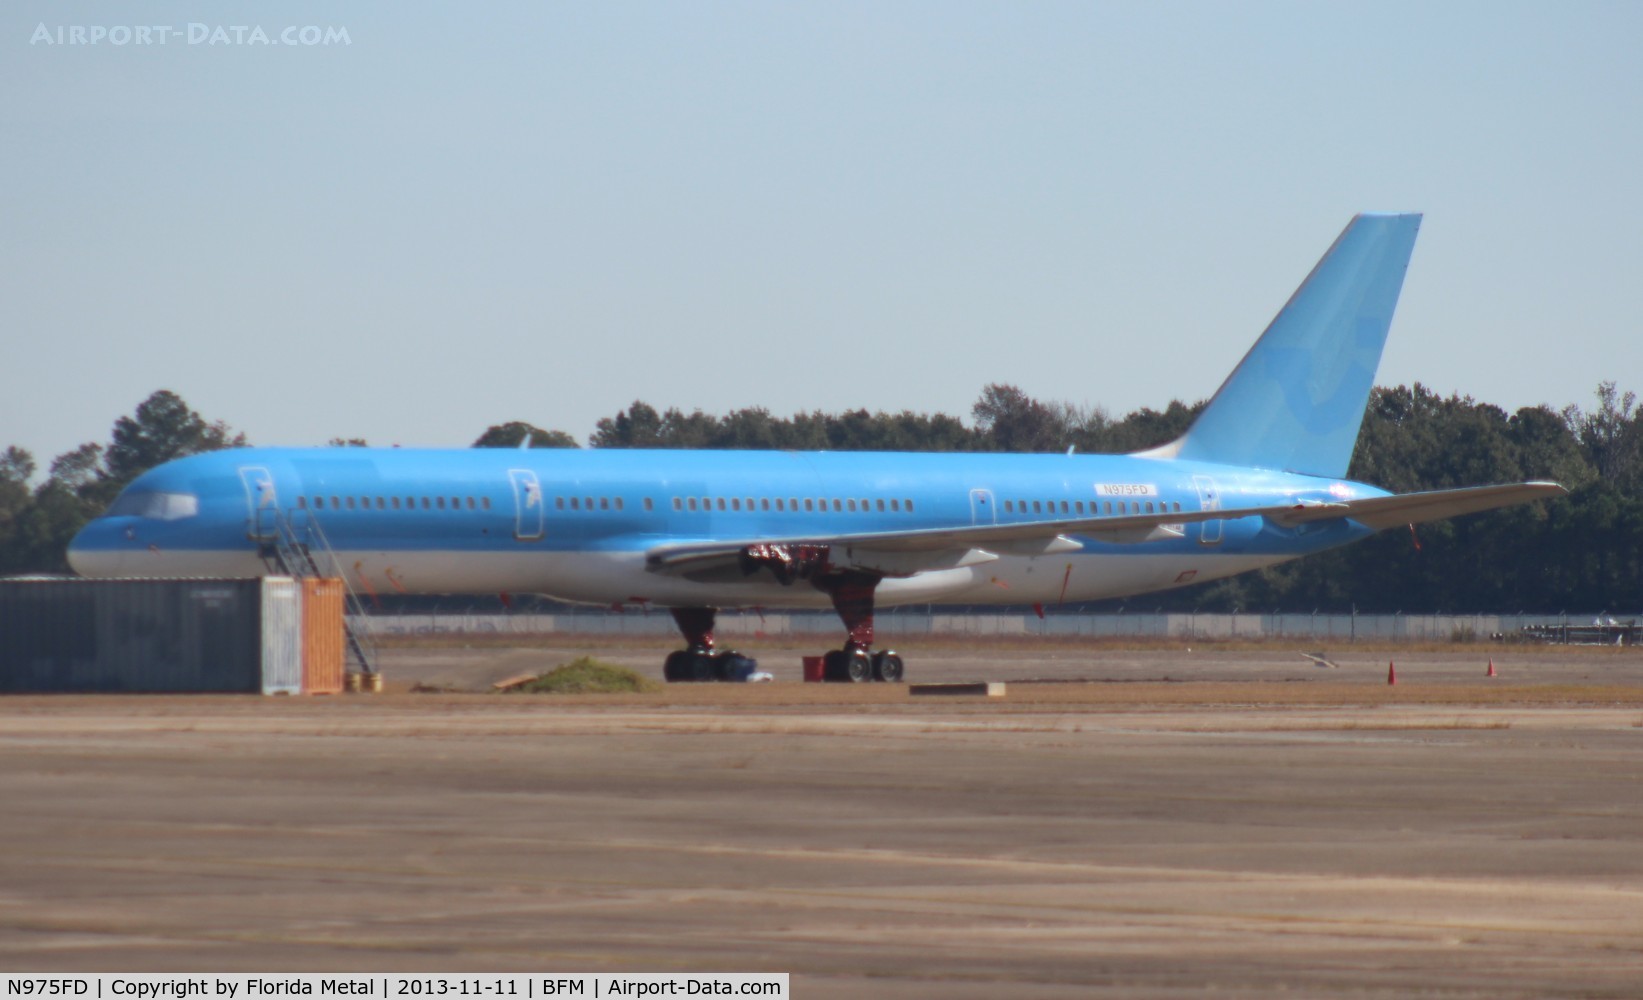 N975FD, 1993 Boeing 757-2B7 C/N 27146, Ex Thomson and USAirways 757-200, now being converted to a freighter for Fed Ex